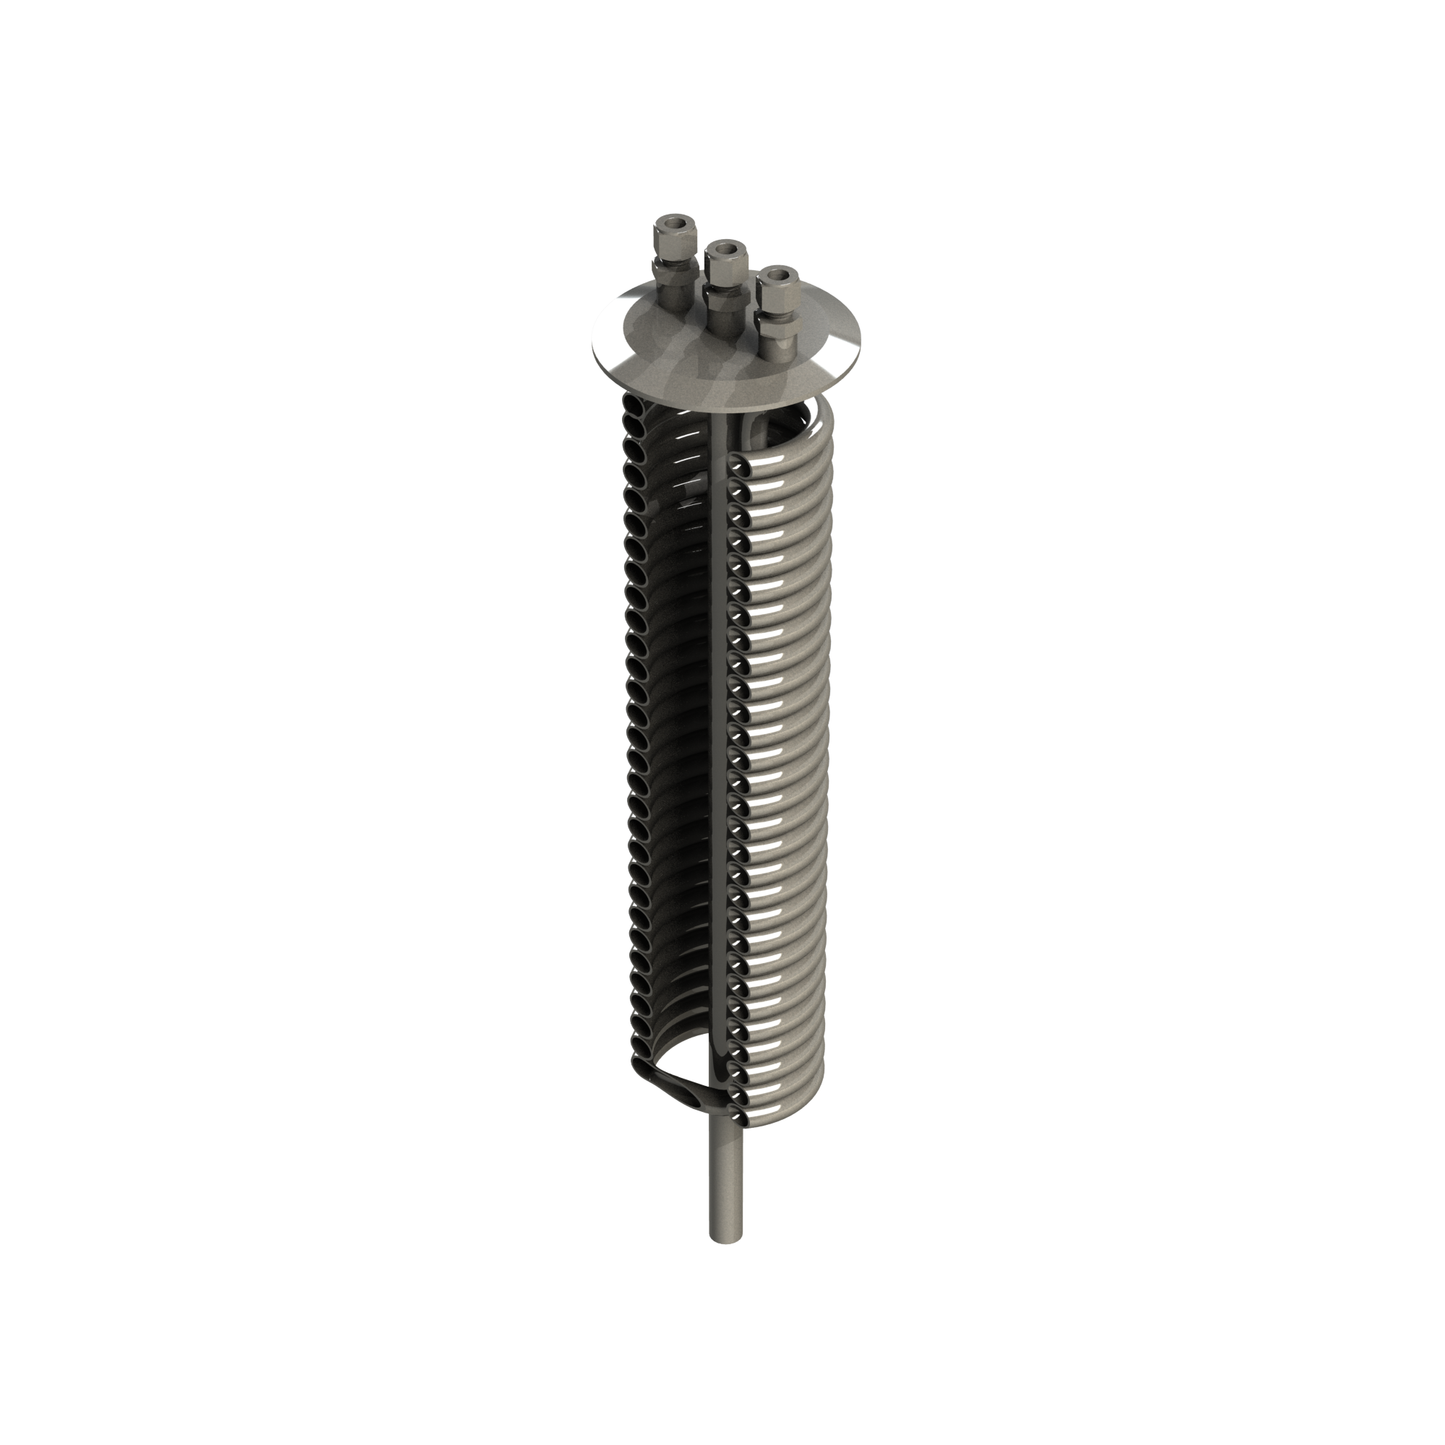 Condensing Coil Siphon Tube for Solvent Tank